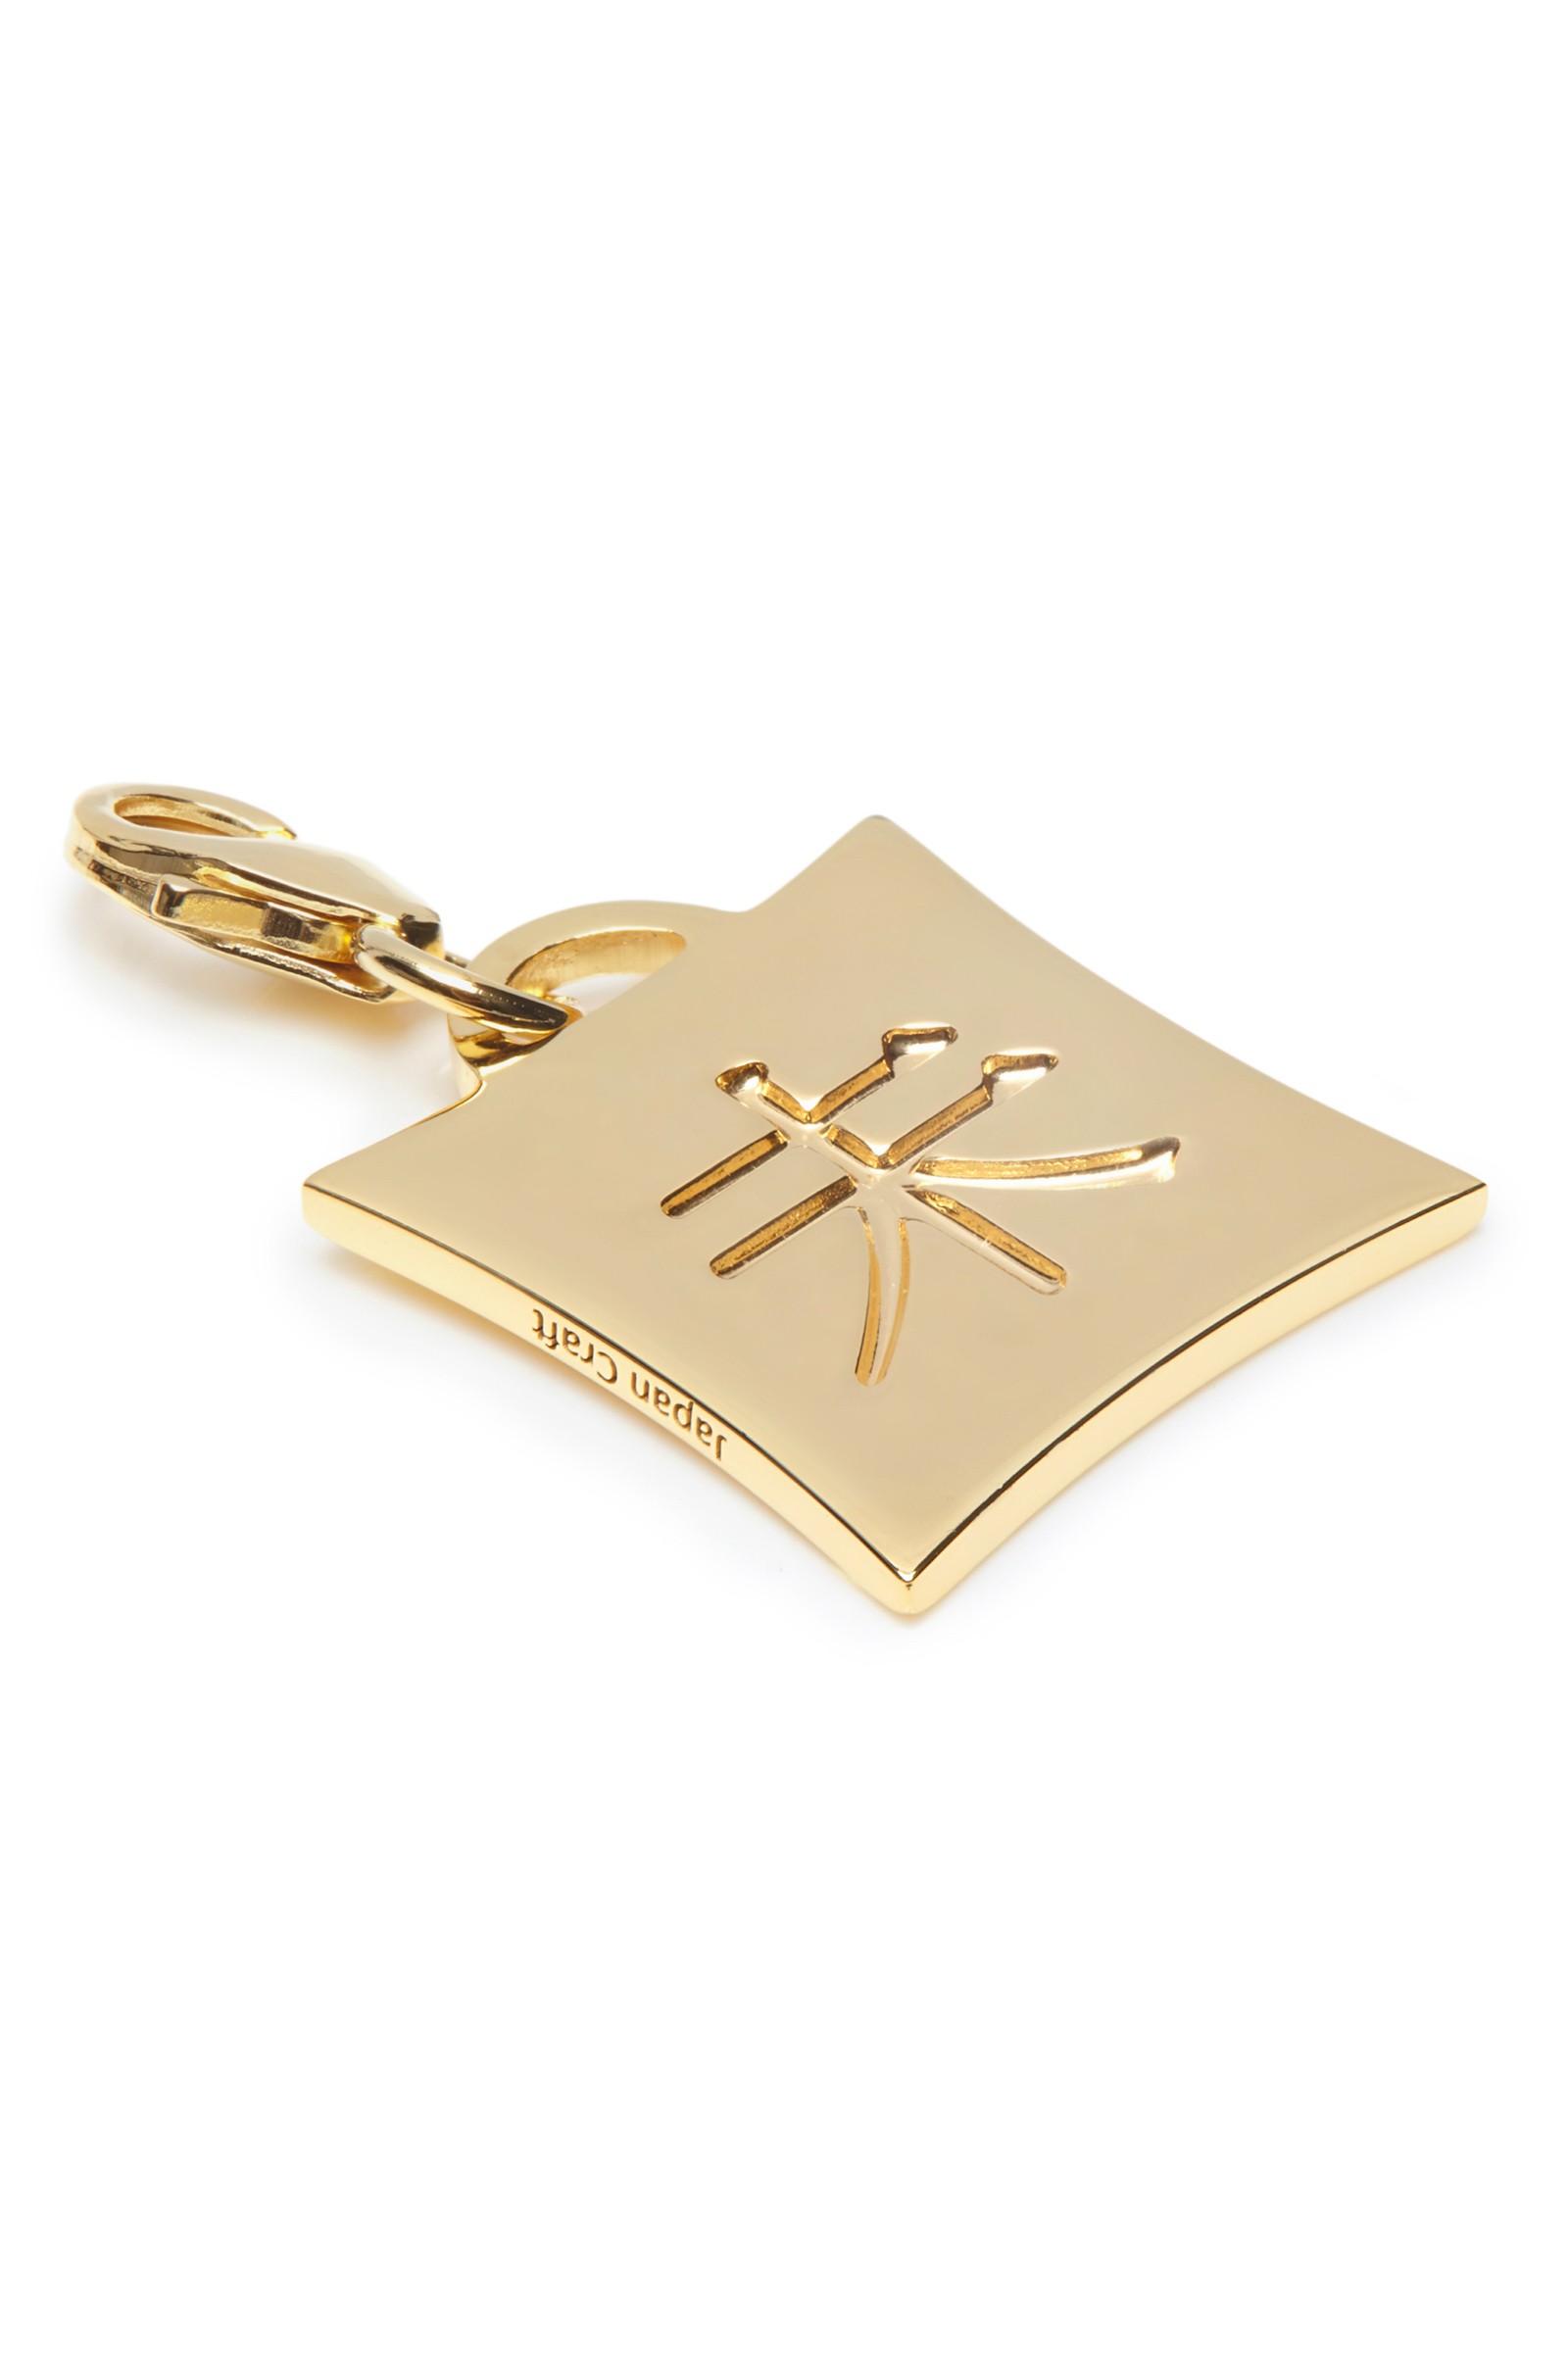 JAPANESE STAR SIGN CHARM - SHEEP - 18KT GOLD PLATED